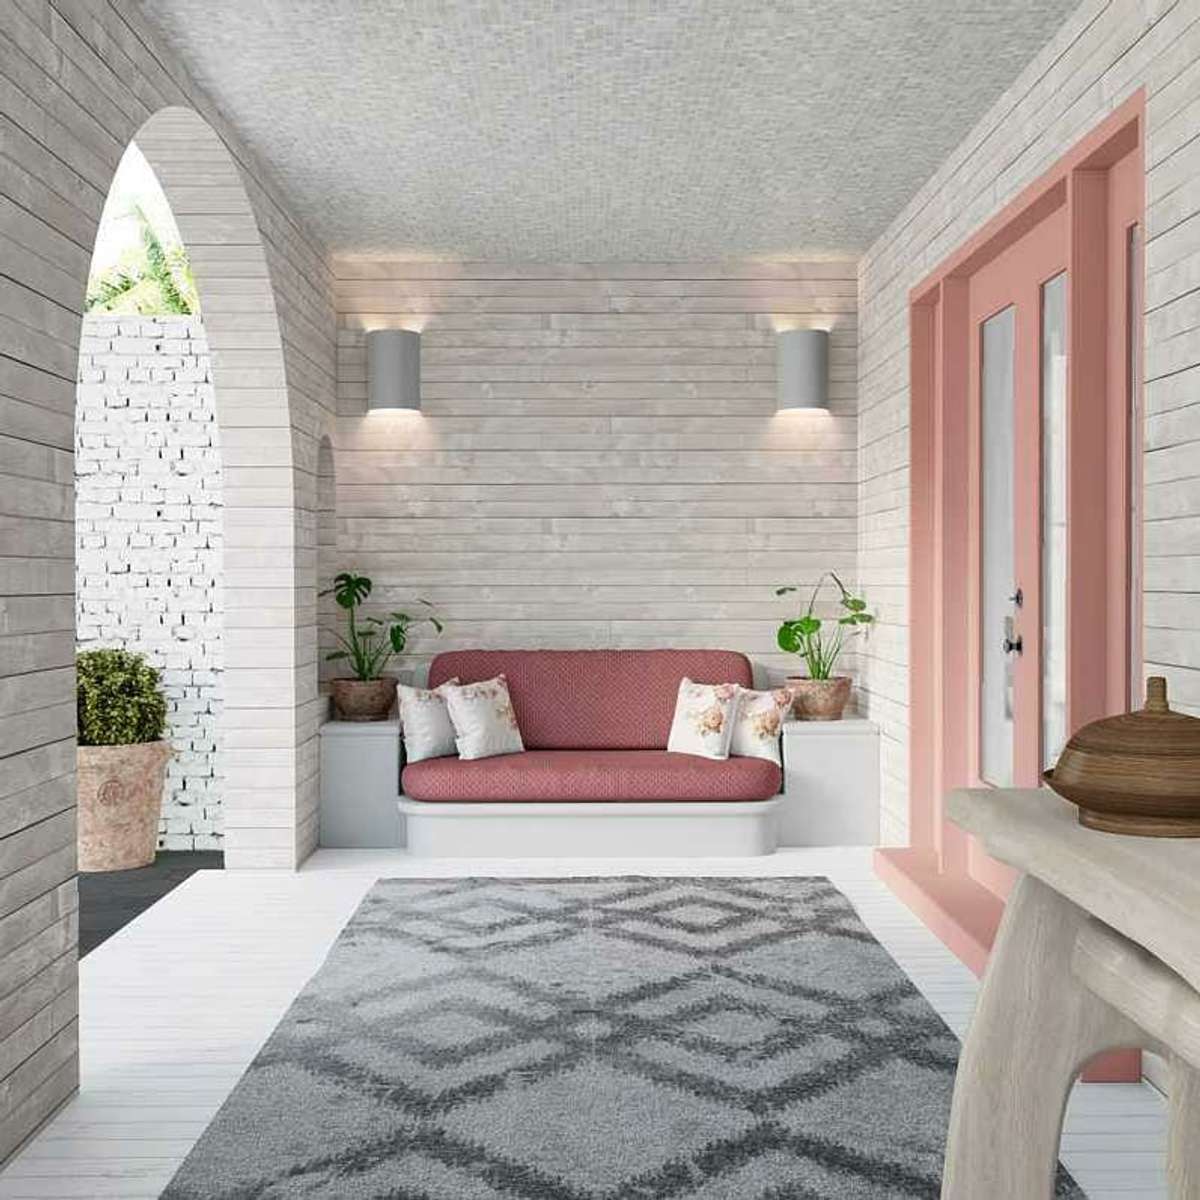 I love pink and white combination.. it gives a smooth impact and helps you to calm your mind and get away from stress. It is NOT a girl color anymore.. just try it 
.
.
.
.
#interiorstyling #interiorstyling #housedesign #myhousebeautiful #beautifulhomes #homeinteriordesign #thesinglewindow #drawingroom #drawingroomdecor #pinkhomedecor